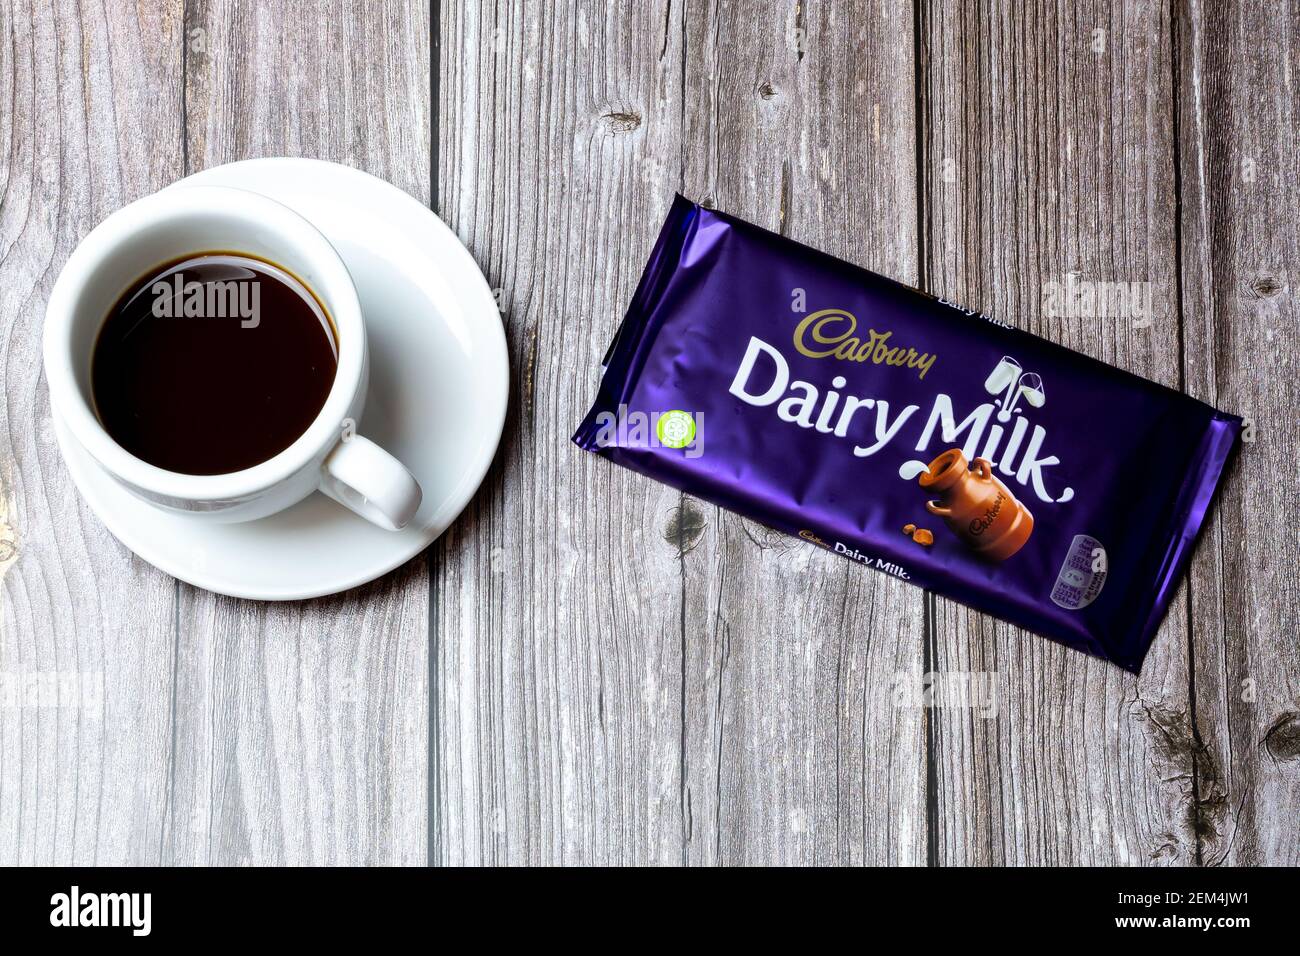 A Bar of Cadbury Dairy Milk chocolate lad on a wooden table next to a cup of coffee Stock Photo